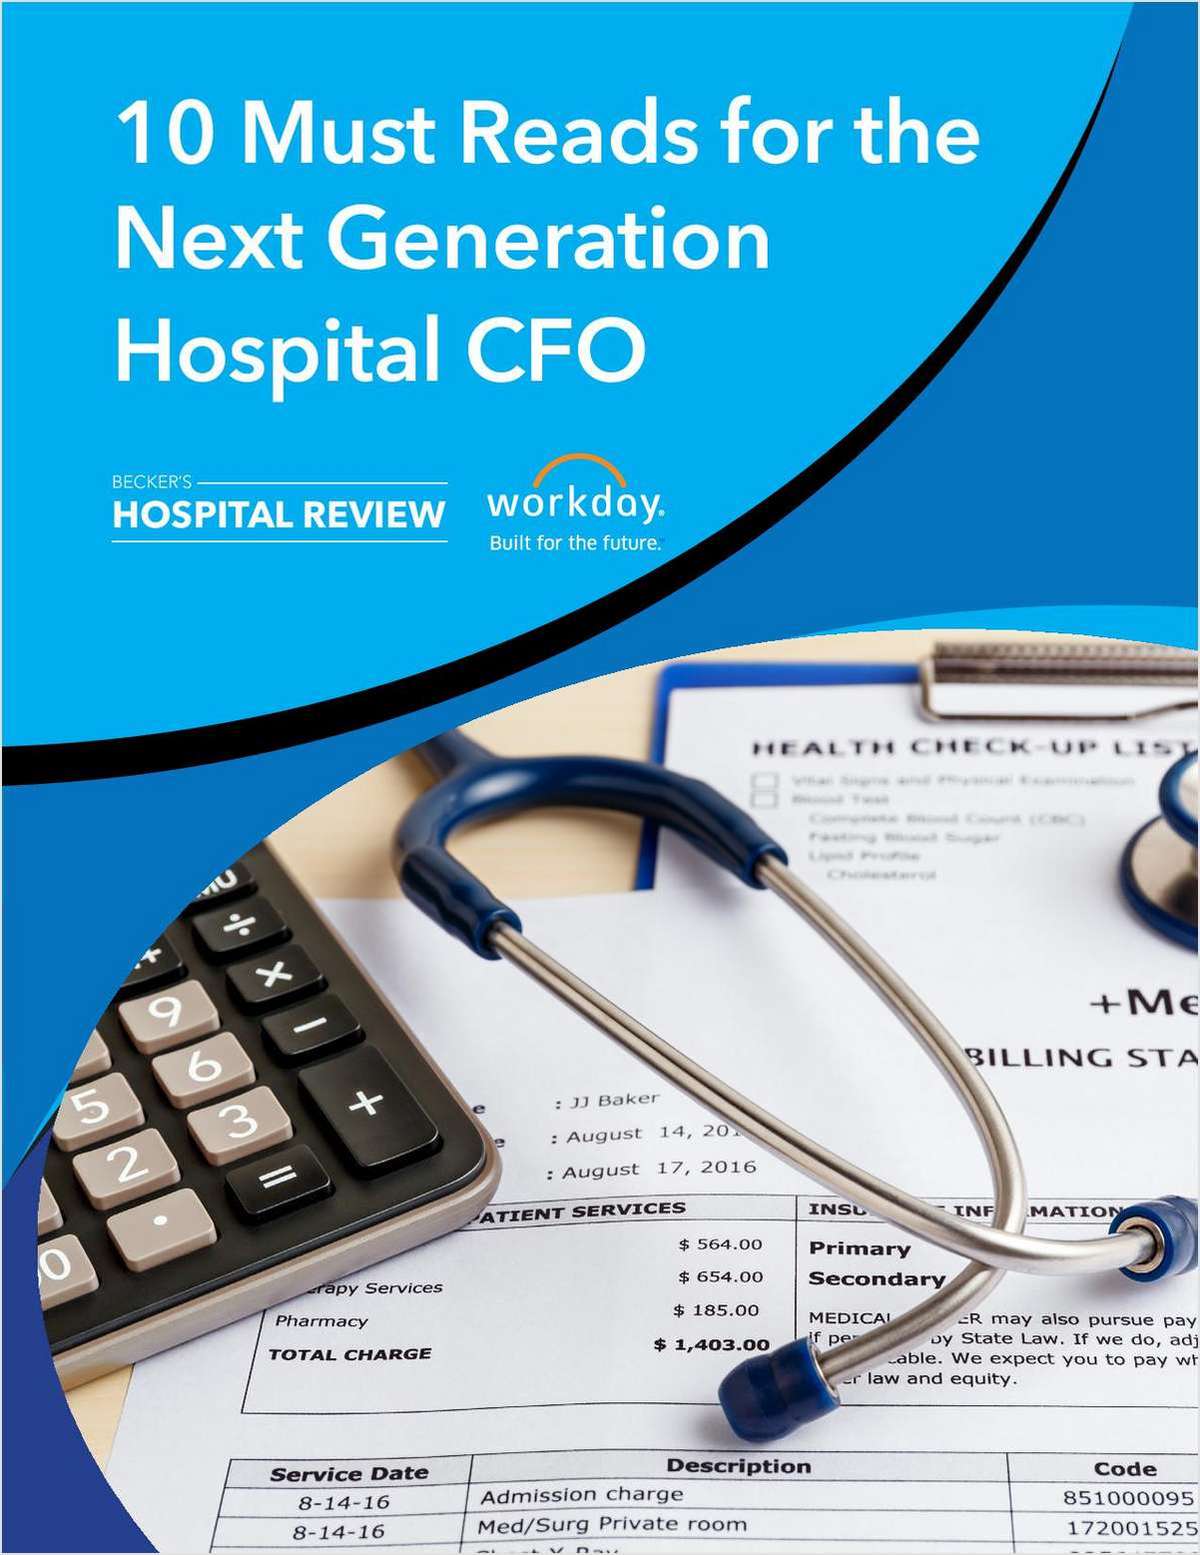 10 Must Reads for the Healthcare CFO